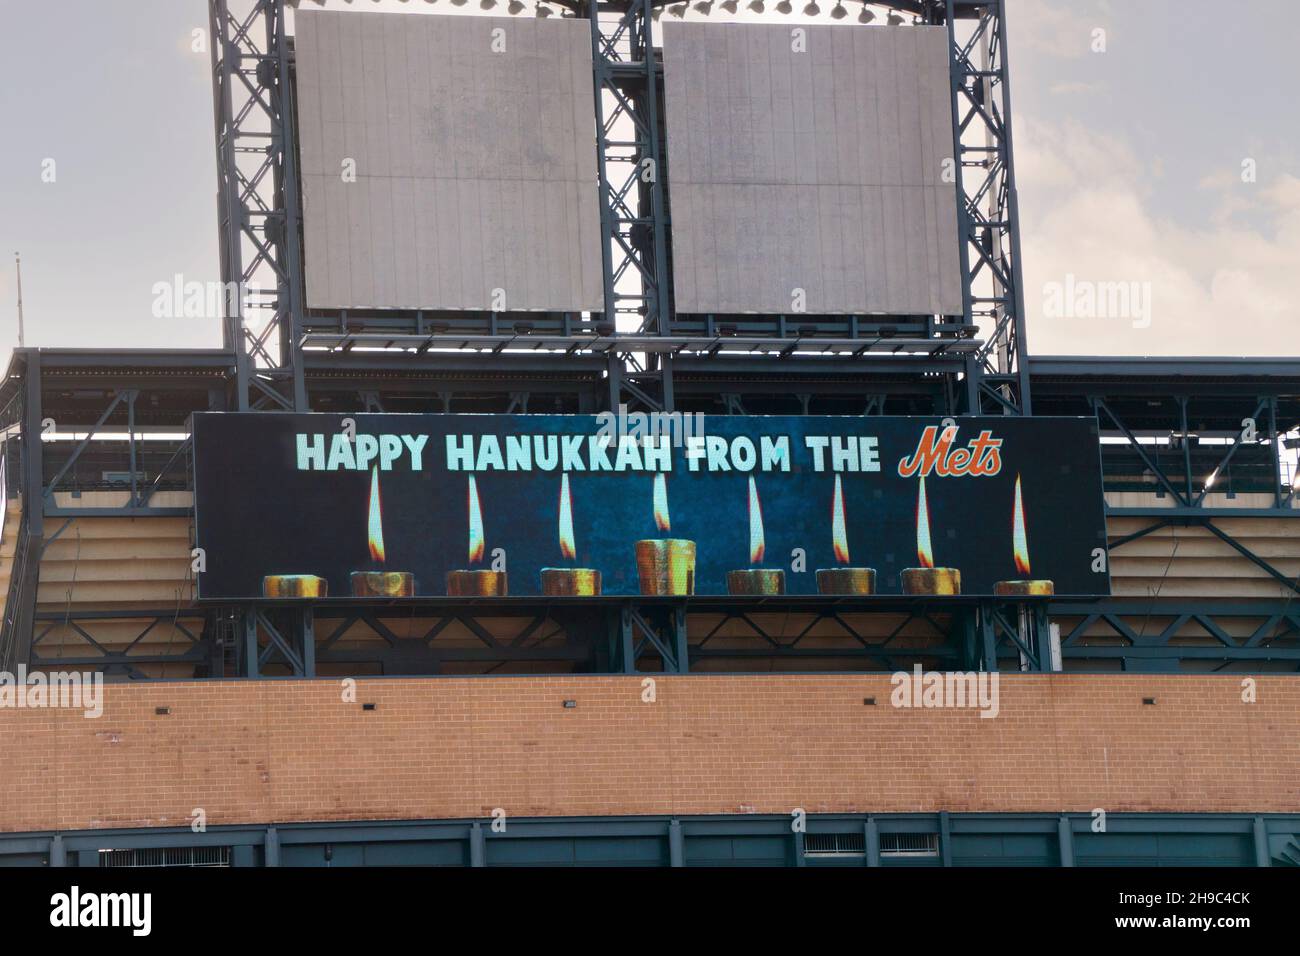 A sign on top of the exterior of Citi Field wishes fans - especially Jewish fans - a Happy Hanukkah. In Flushing, Queens, New York City. Stock Photo